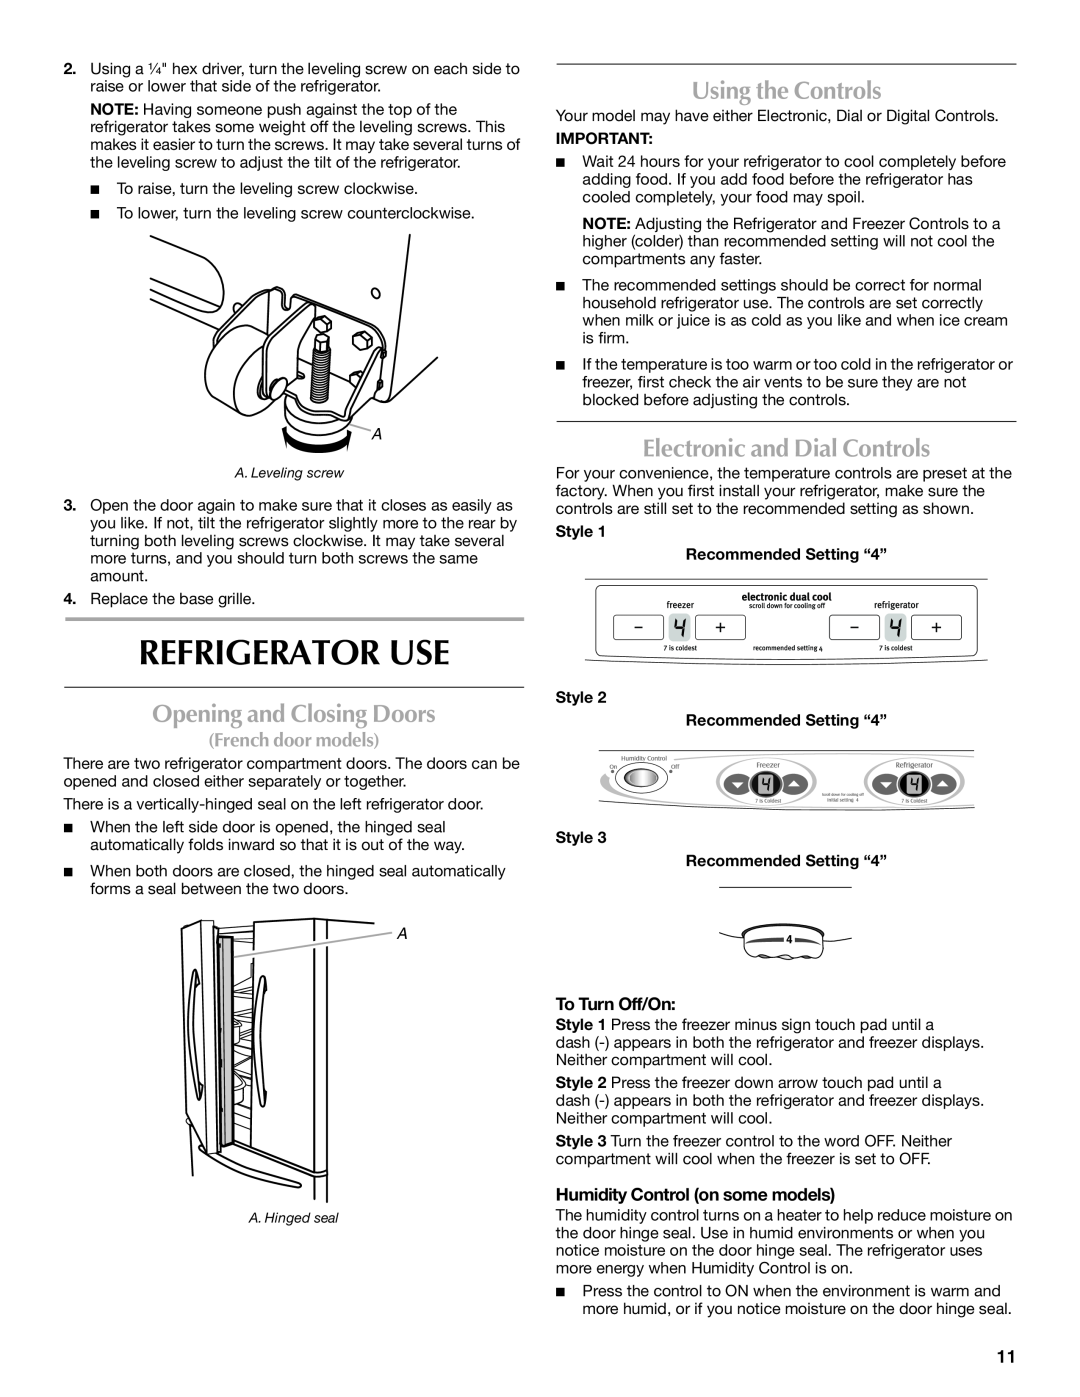 Maytag MFD2562VEW Refrigerator Use, Opening and Closing Doors, Using the Controls, Electronic and Dial Controls 